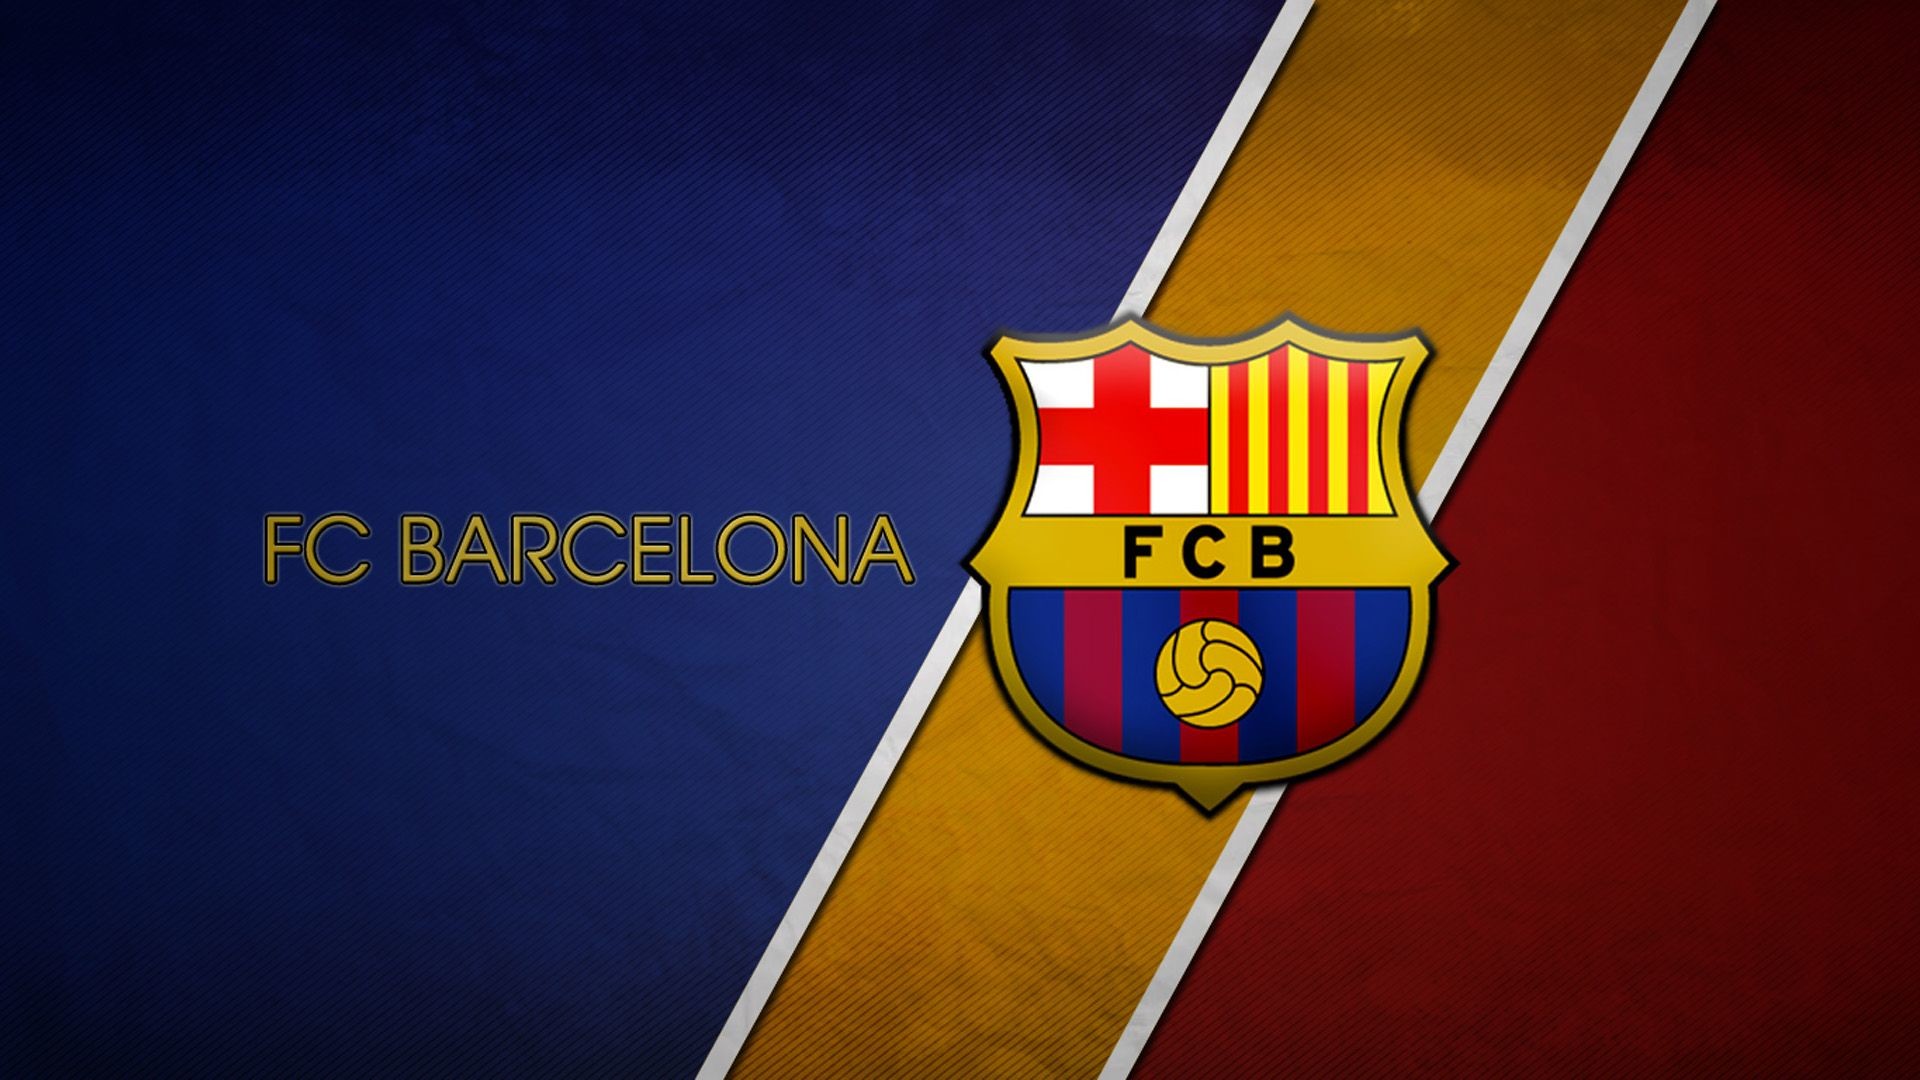 1920x1080 ... Cool Fc Barcelona Wallpapers Wallpaper HD 1080p Free Download For  Mobile . You Can Also Upload